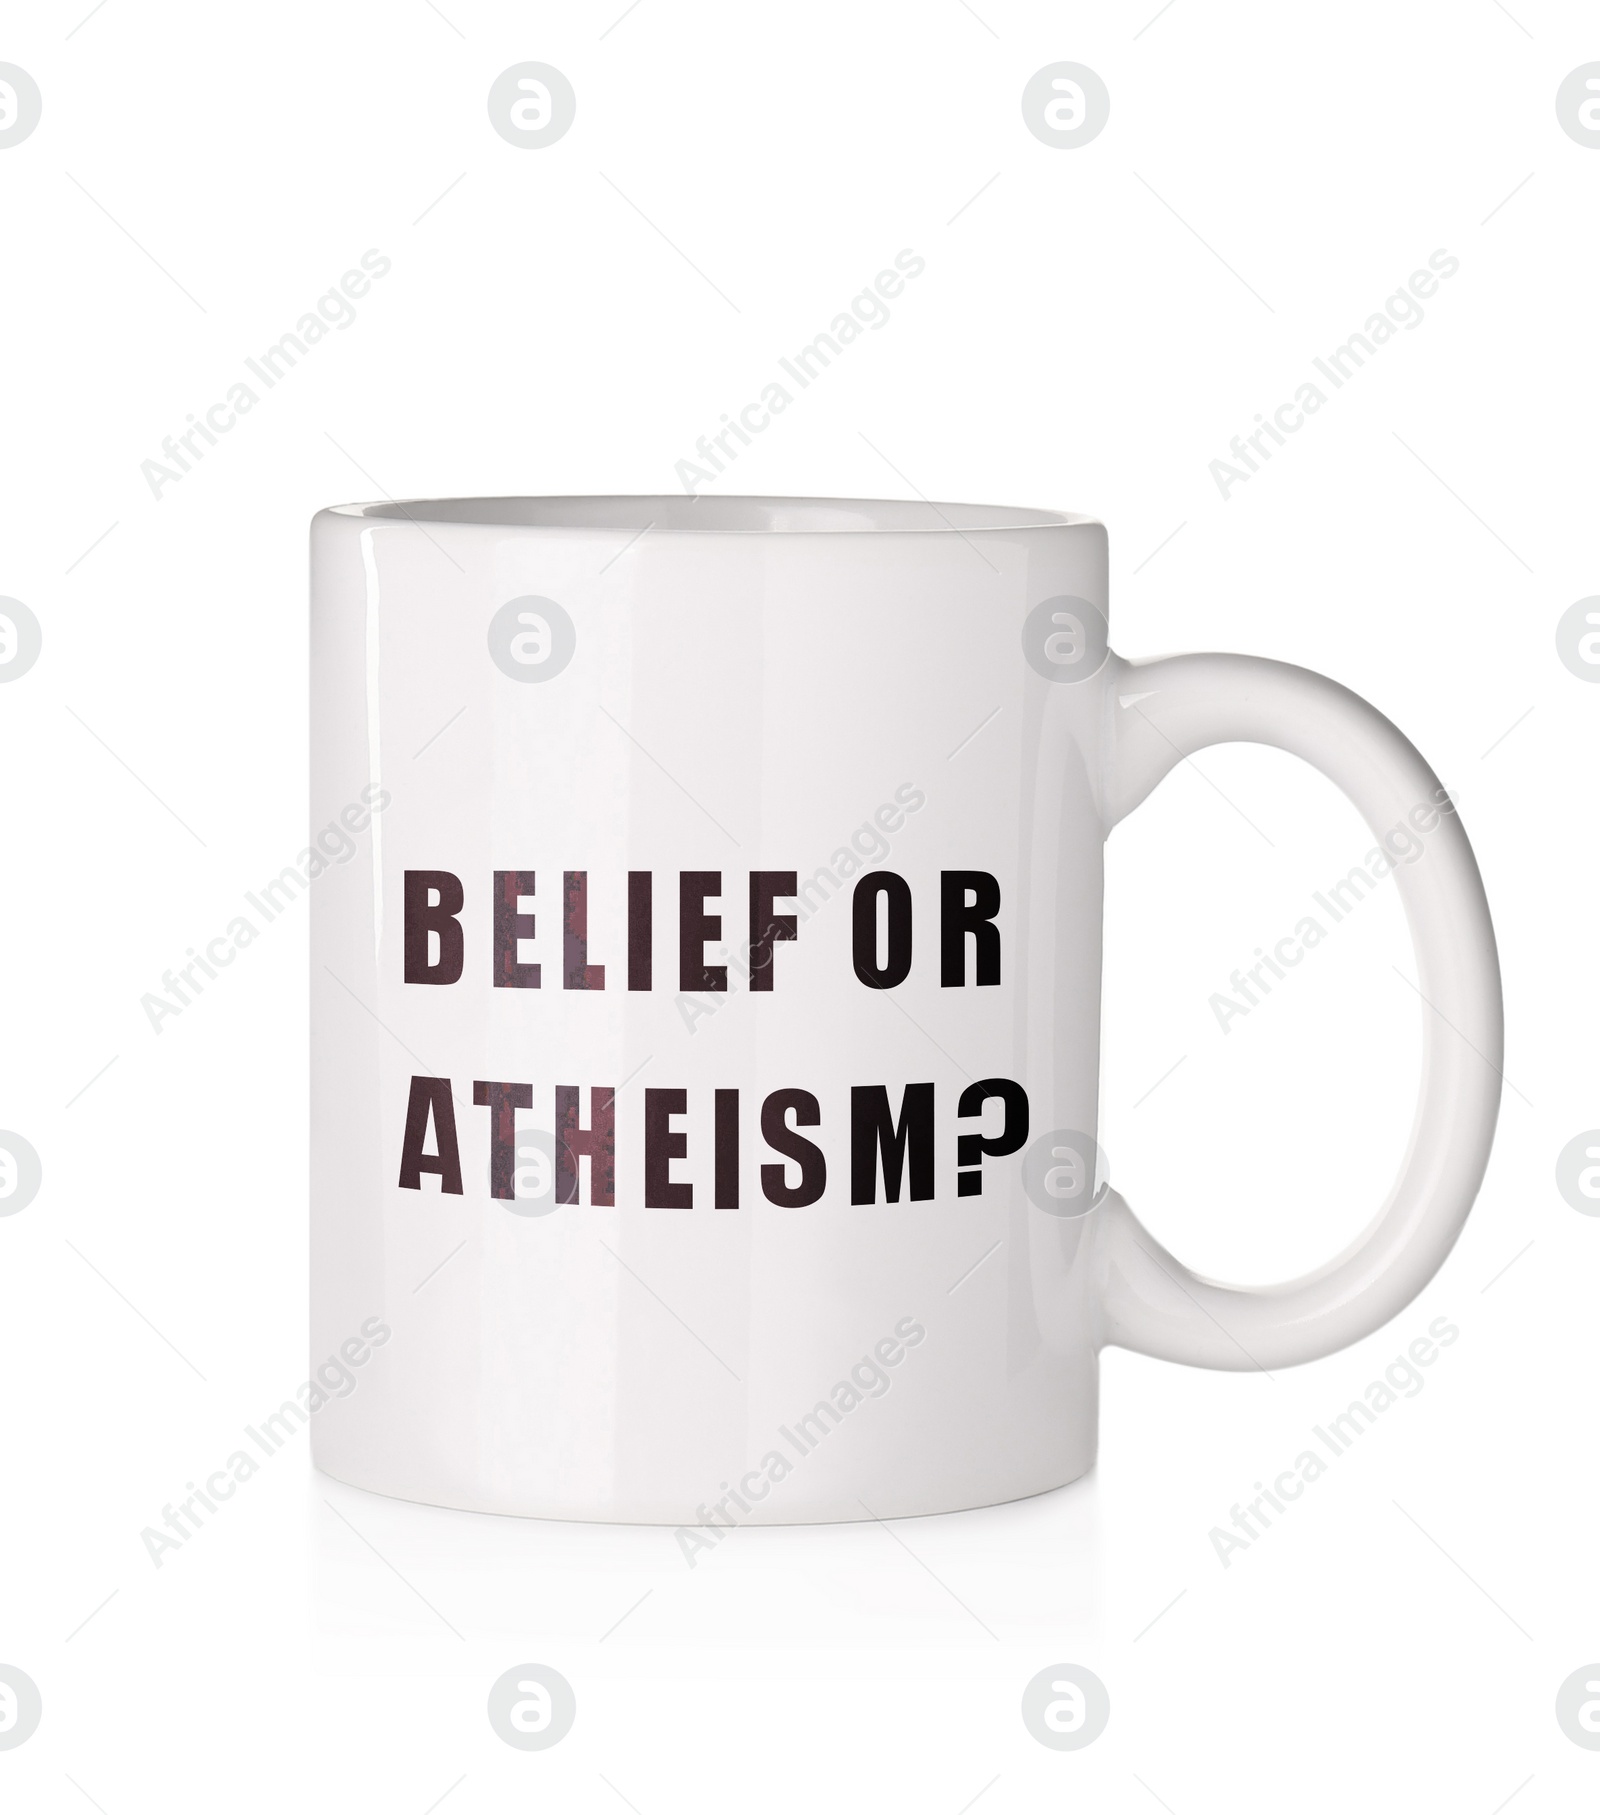 Image of Cup with phrase Belief Or Atheism? on white background